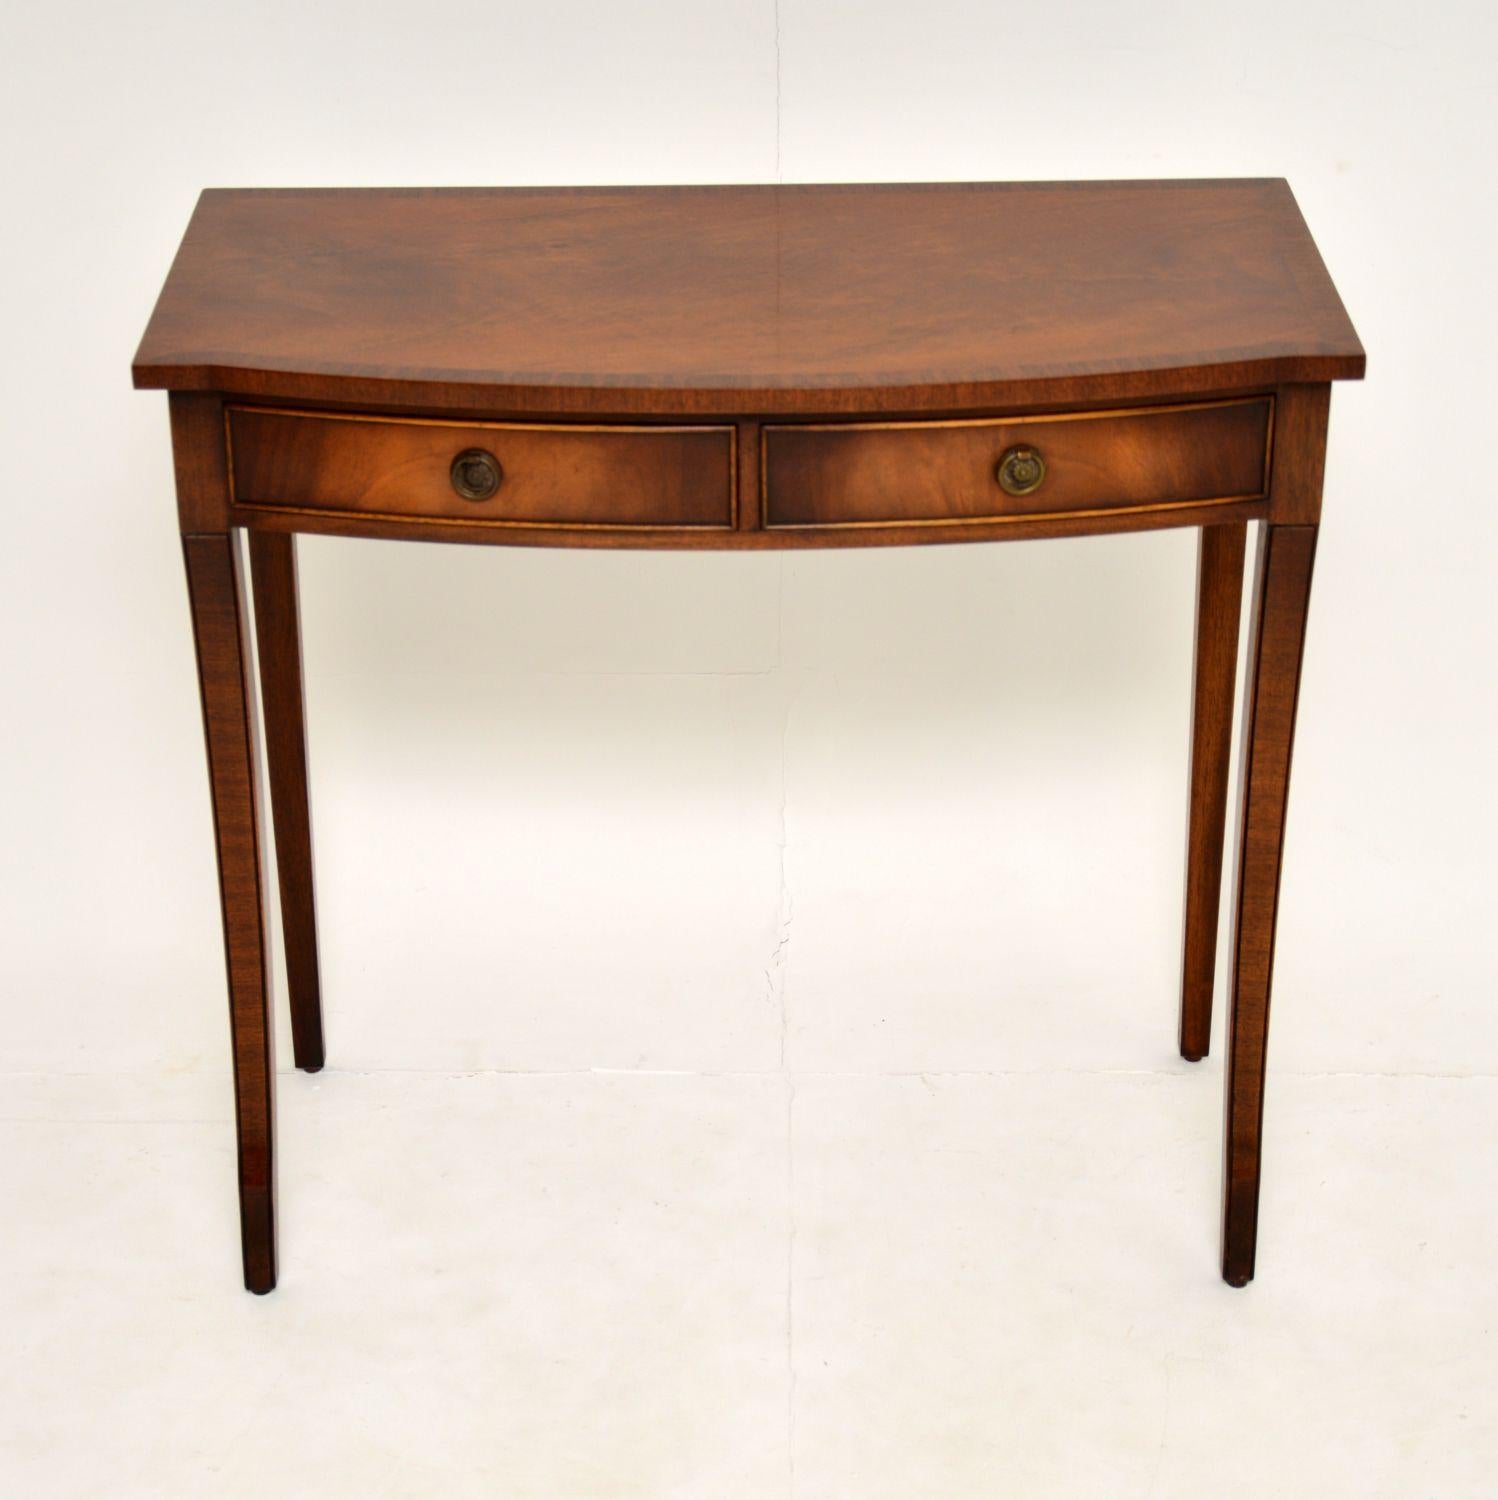 An elegant and very well made side table in mahogany. Its in the antique Regency style, and it dates from circa 1950s.

This is of excellent quality and is a great size to be used as a console table or even an occasional desk or writing